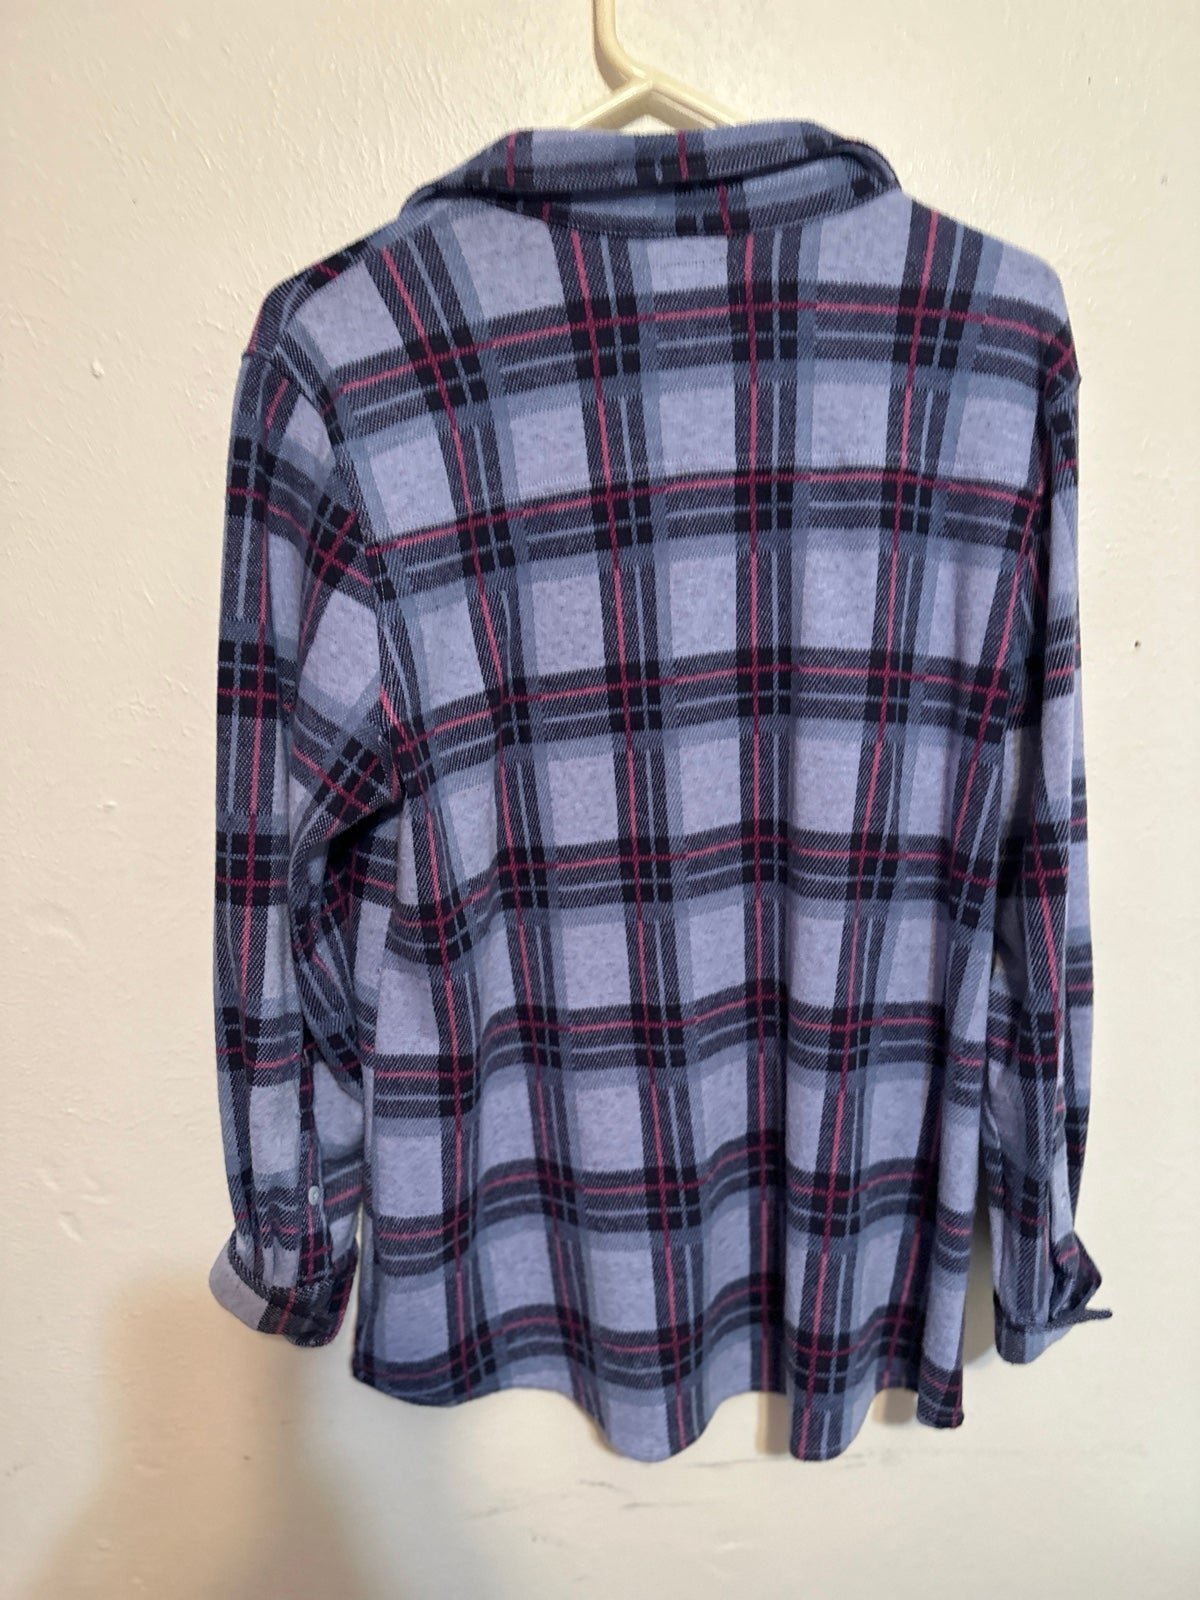 Popular Favorite Plaid Top Blue Pink Plaid Front Pockets Button Down Fleece Shirt L NJPExER0w Everyday Low Prices